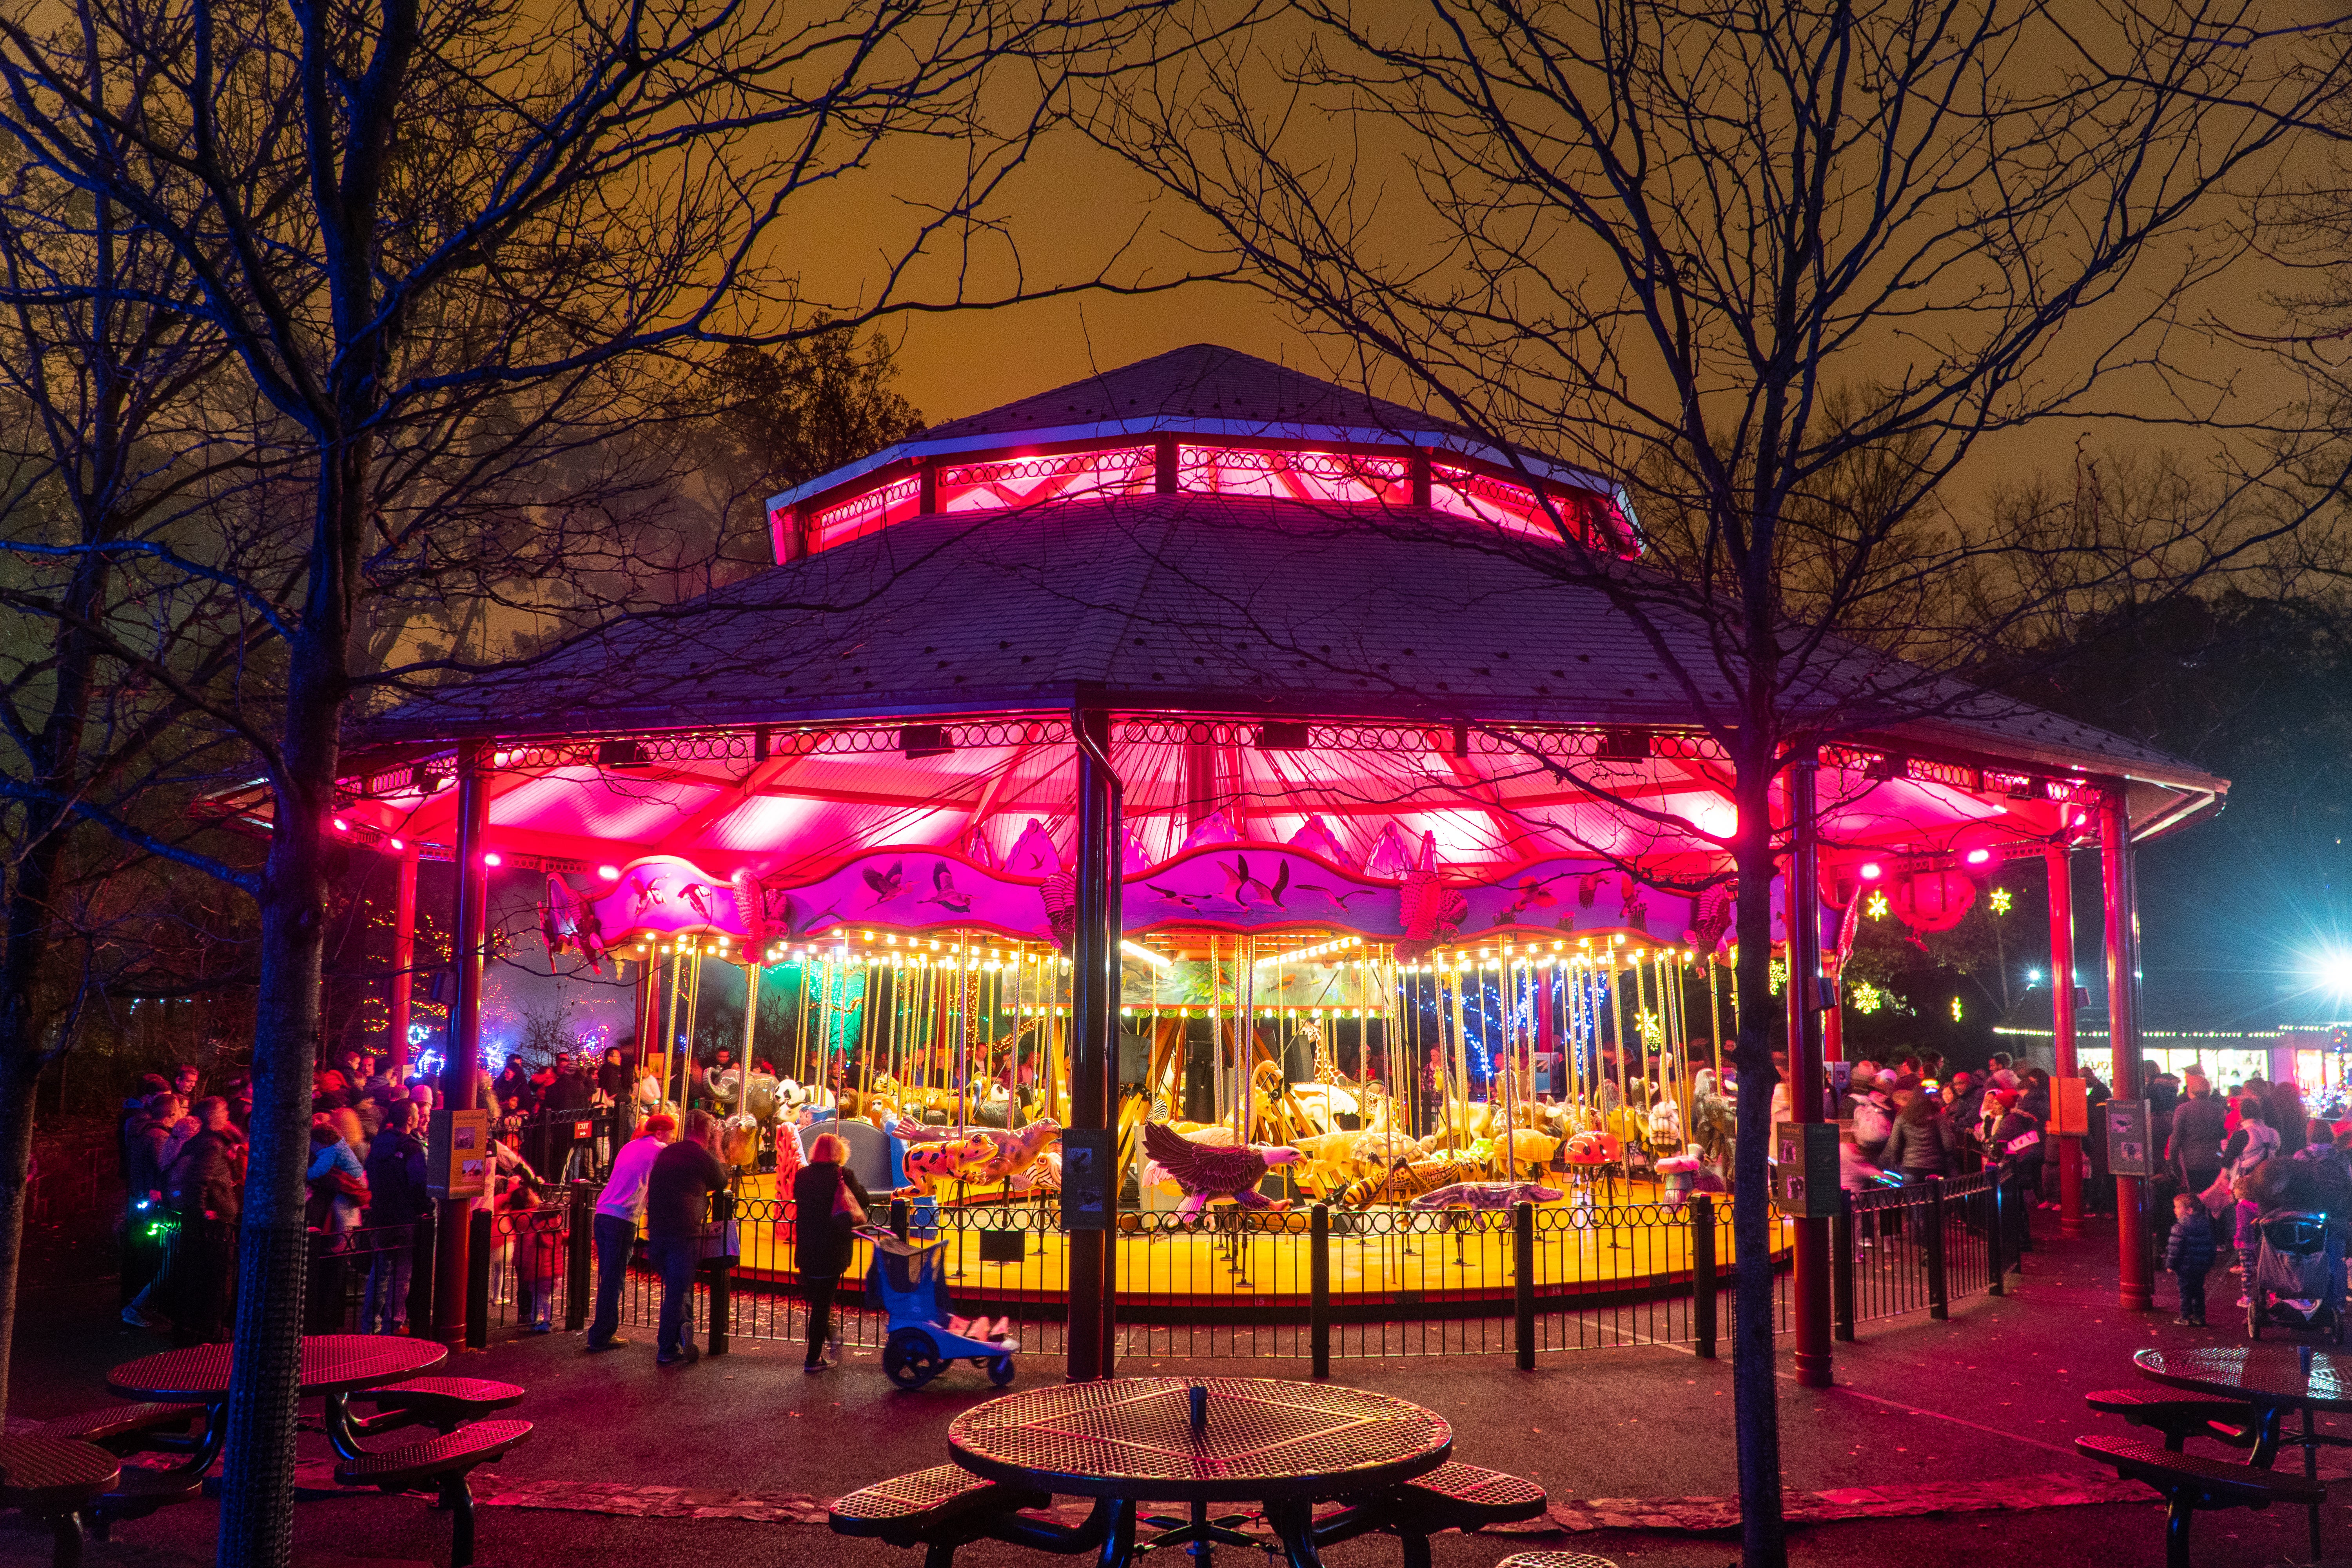 The Zoo's carousel is lit up pink and yellow.